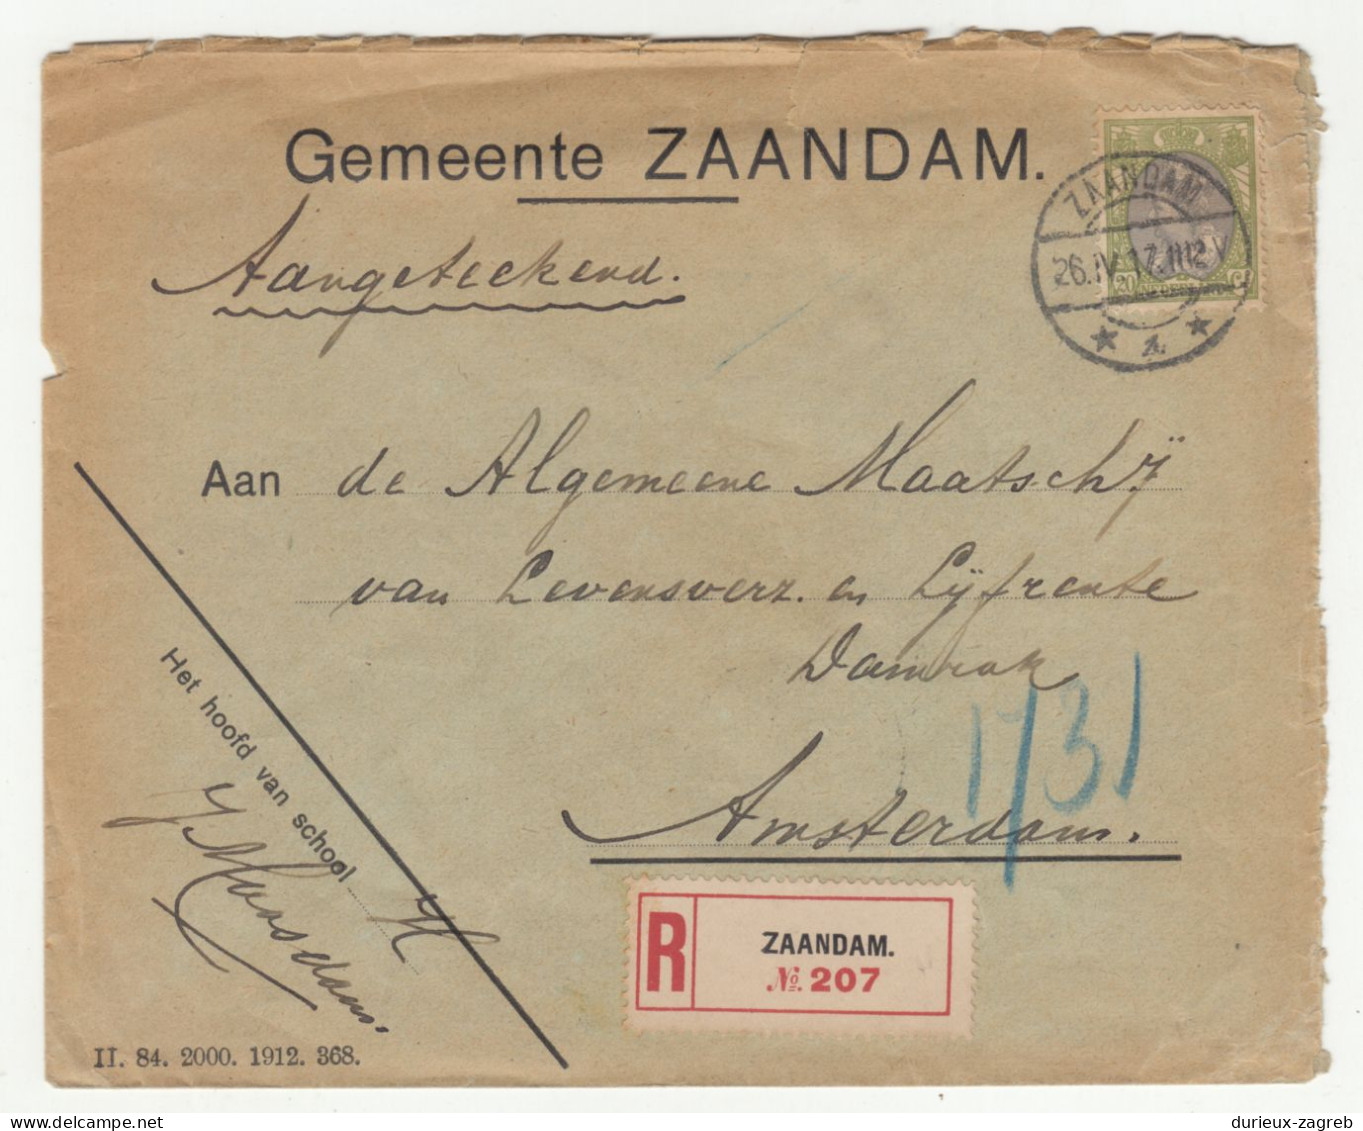 Emeente Zaandam Letter Cover Posted Registered 1917 B240503 - Covers & Documents